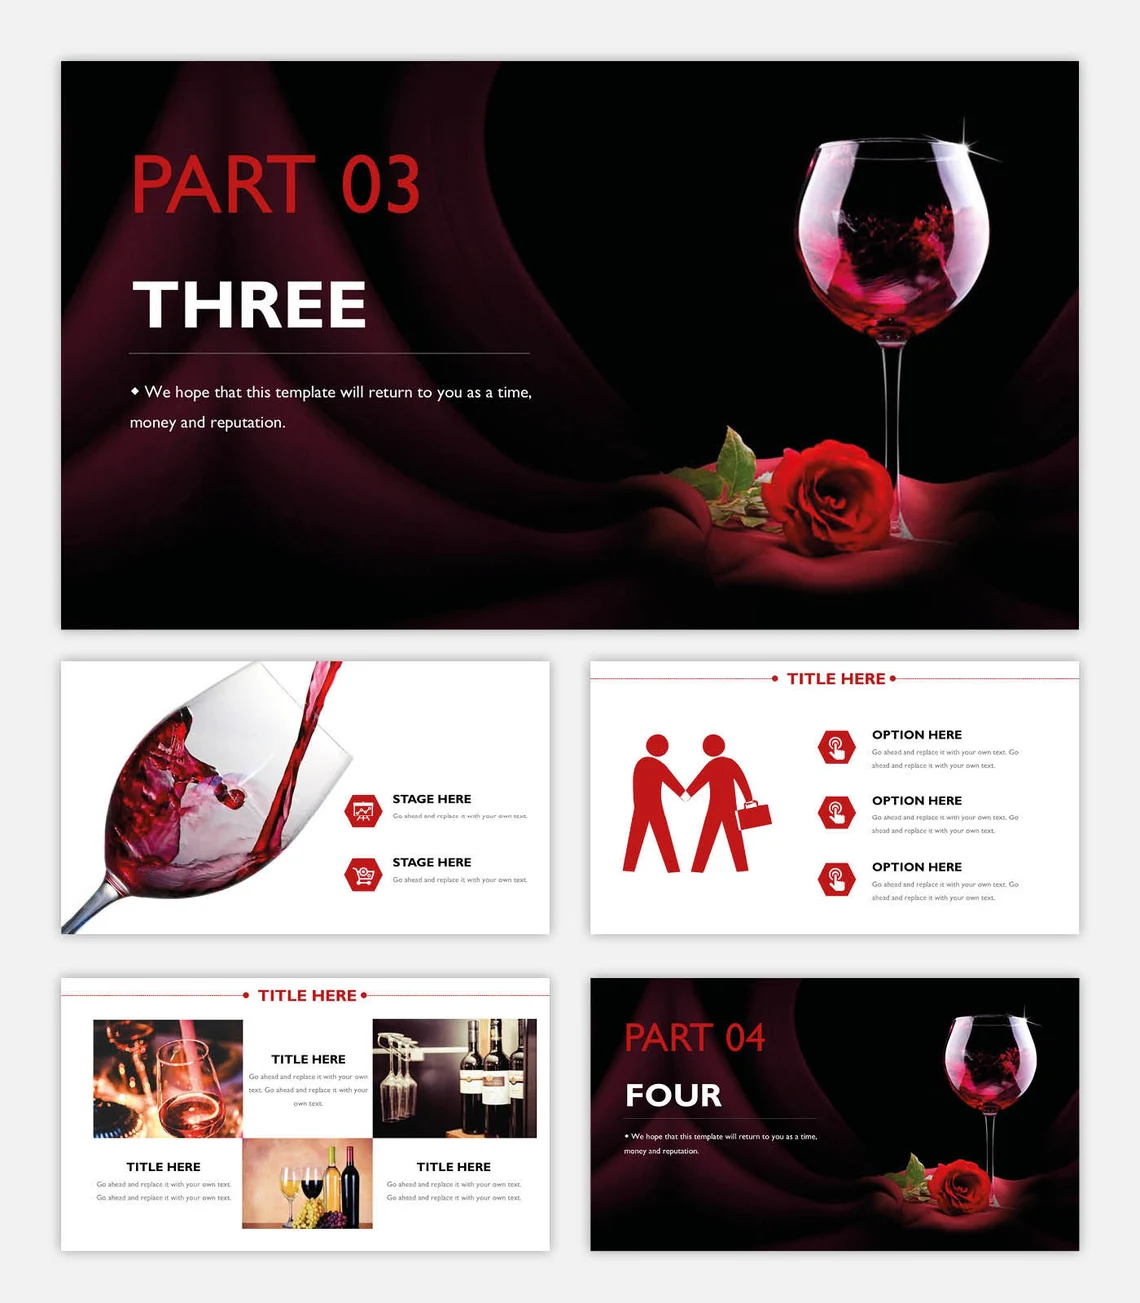 5 different presentation templates with wine culture drinks images.